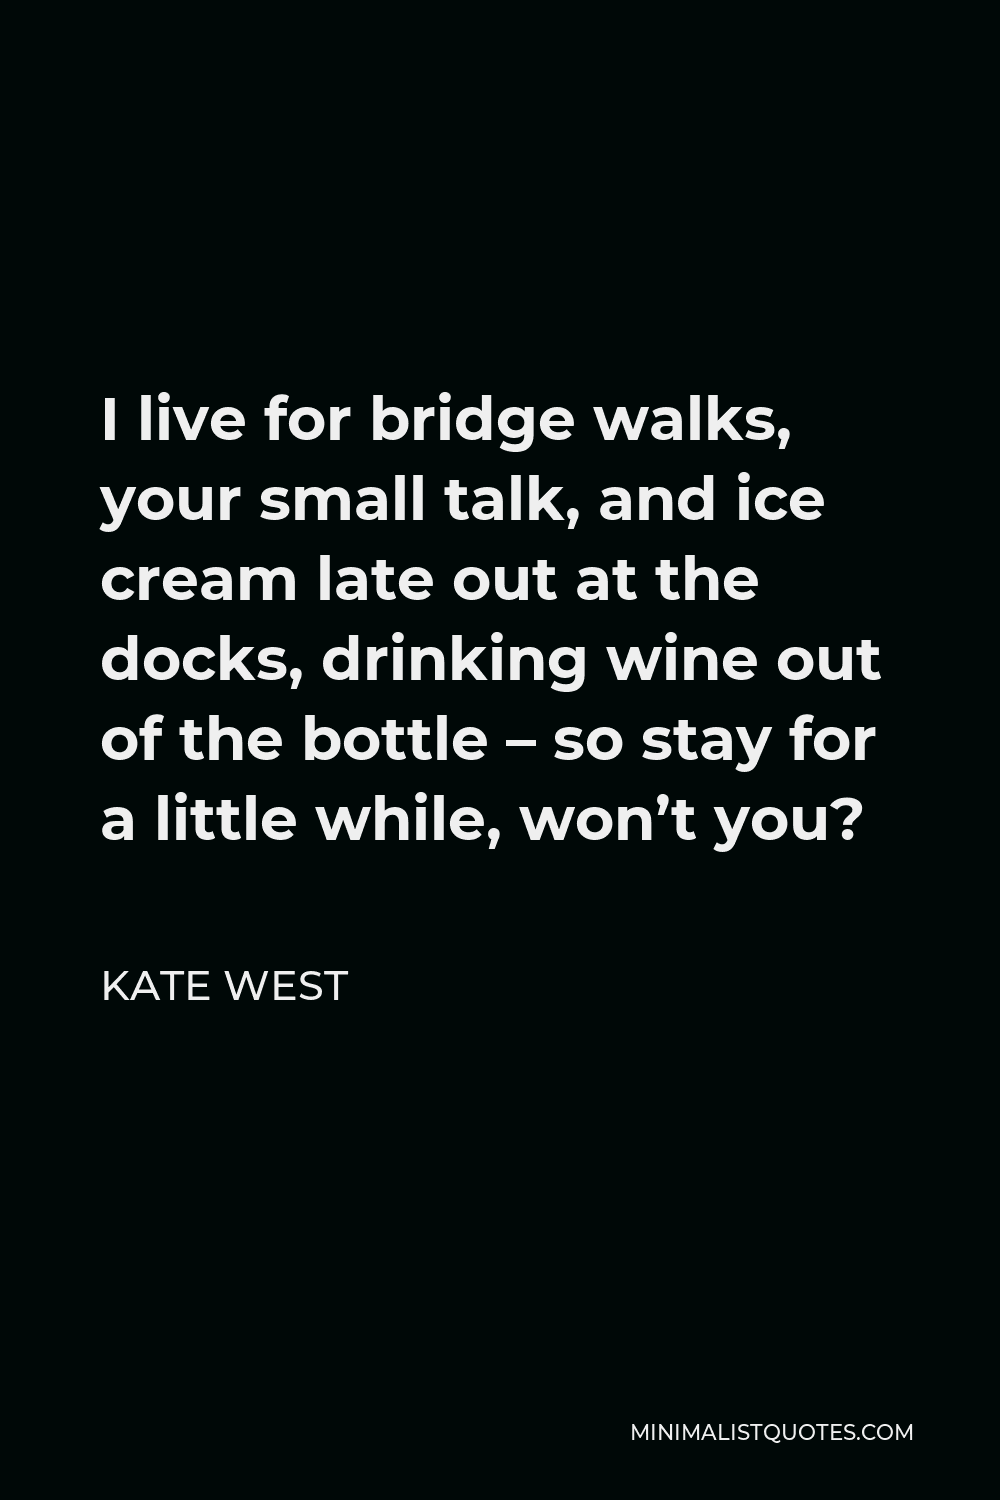 Kate West Quote - I live for bridge walks, your small talk, and ice cream late out at the docks, drinking wine out of the bottle – so stay for a little while, won’t you?